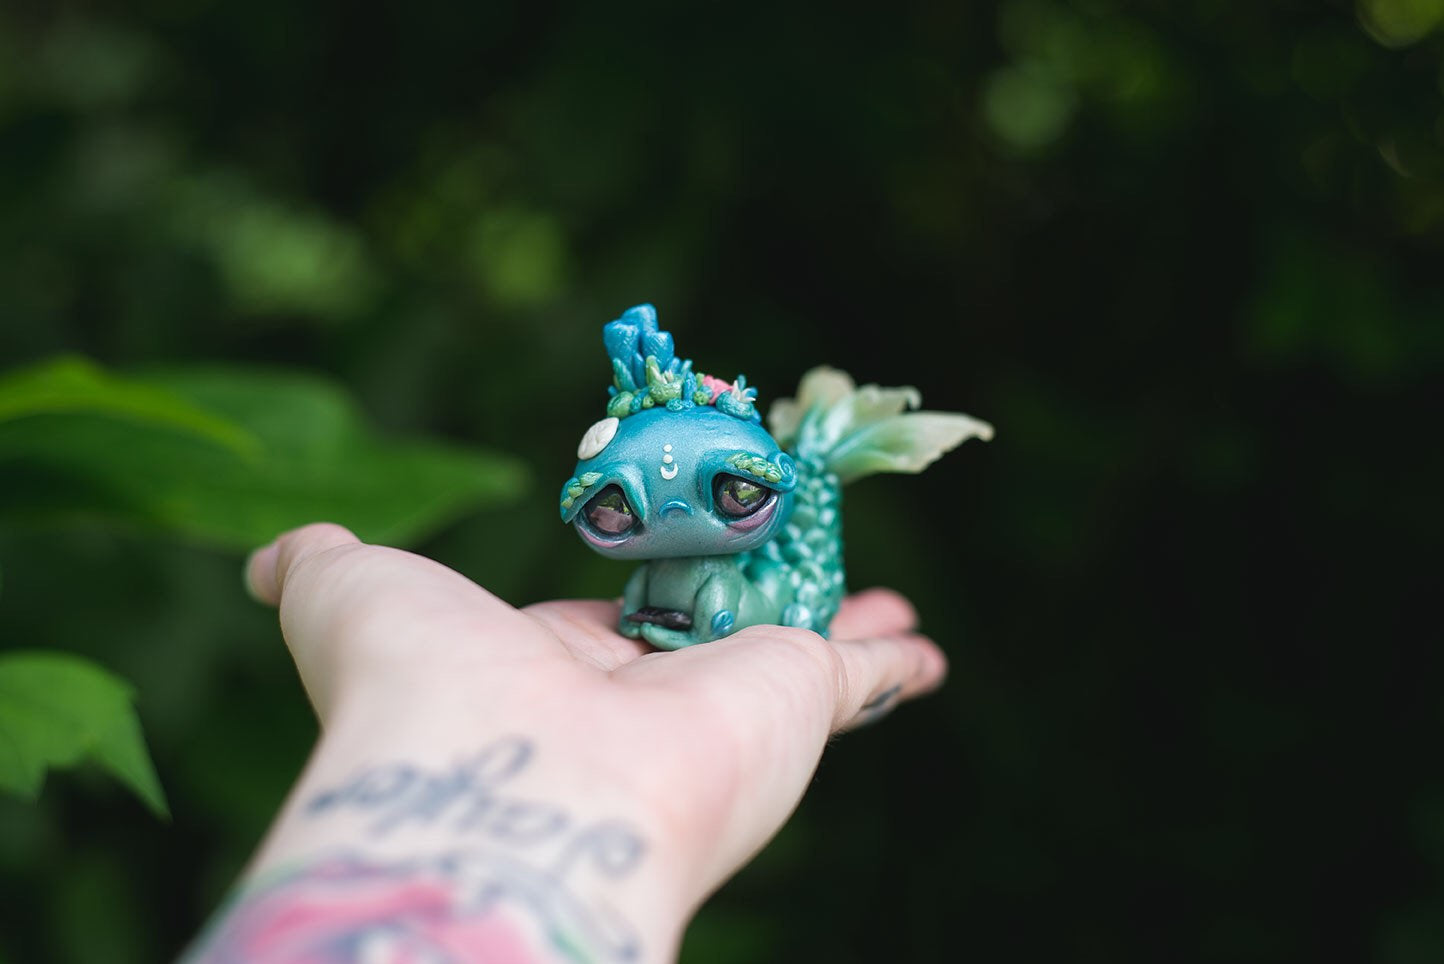 Size Comparison in Hand View of Blue & Green Mermish - handmade polymer clay mermaid creature with coral reef on head holding obsidian